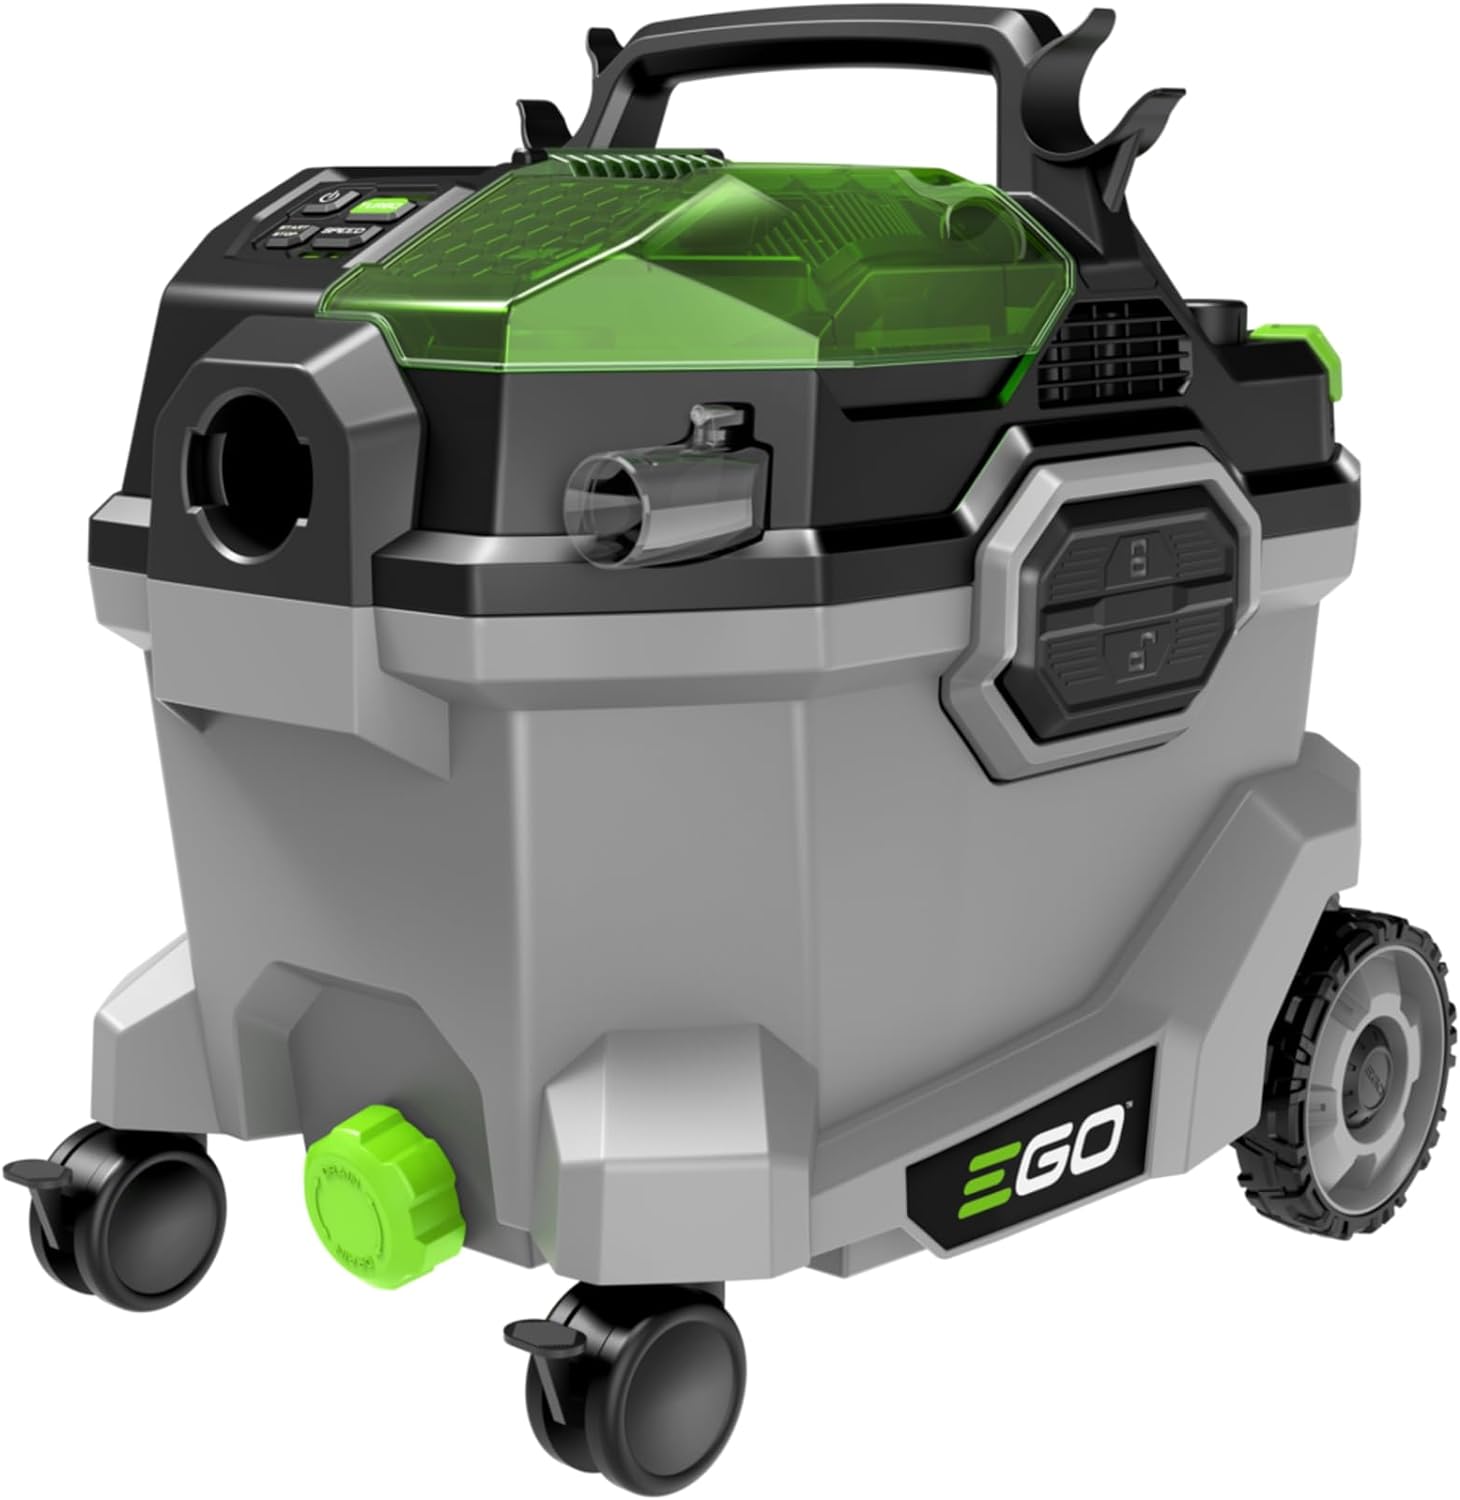 EGO WDV0904 9 Gallon Wet/Dry Vacuum with Mutiple Power Mode - 5.0Ah Battery and 320W Charger Inlcuded